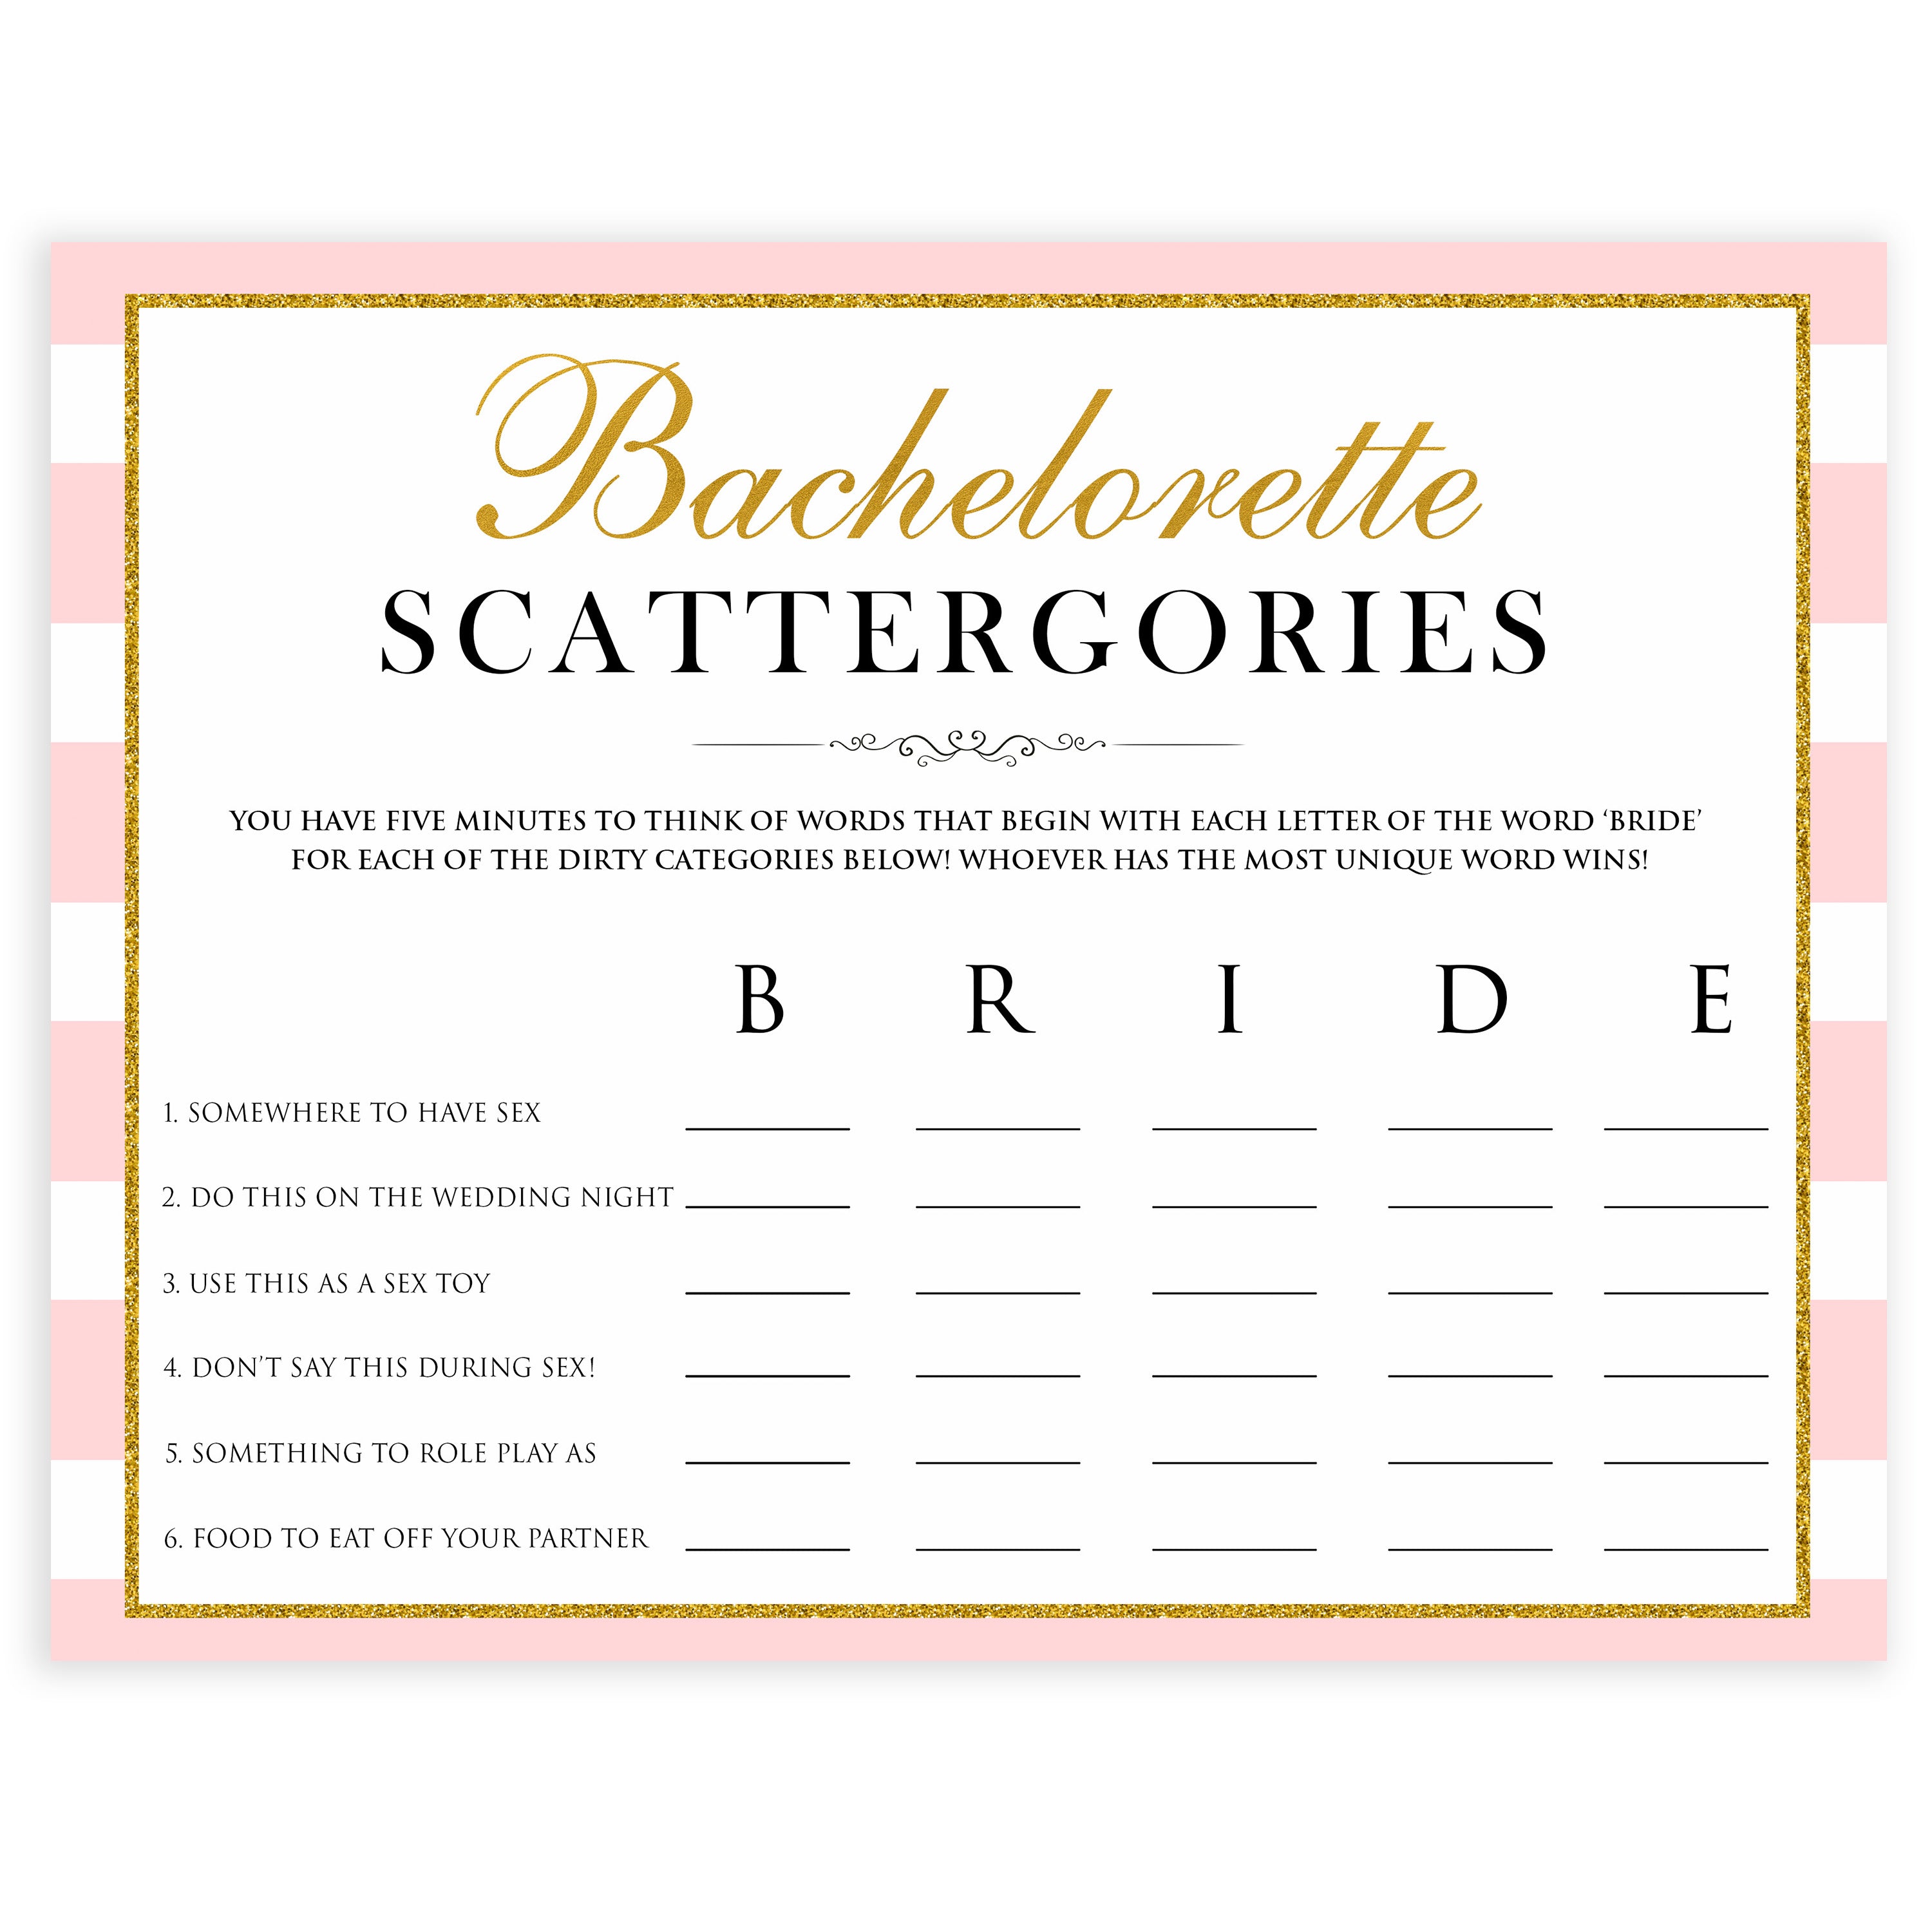 parisian bachelorette games, dirty scattergories game, bridal shower games, naughty bridal games, dirty bachelorette games, top bridal games